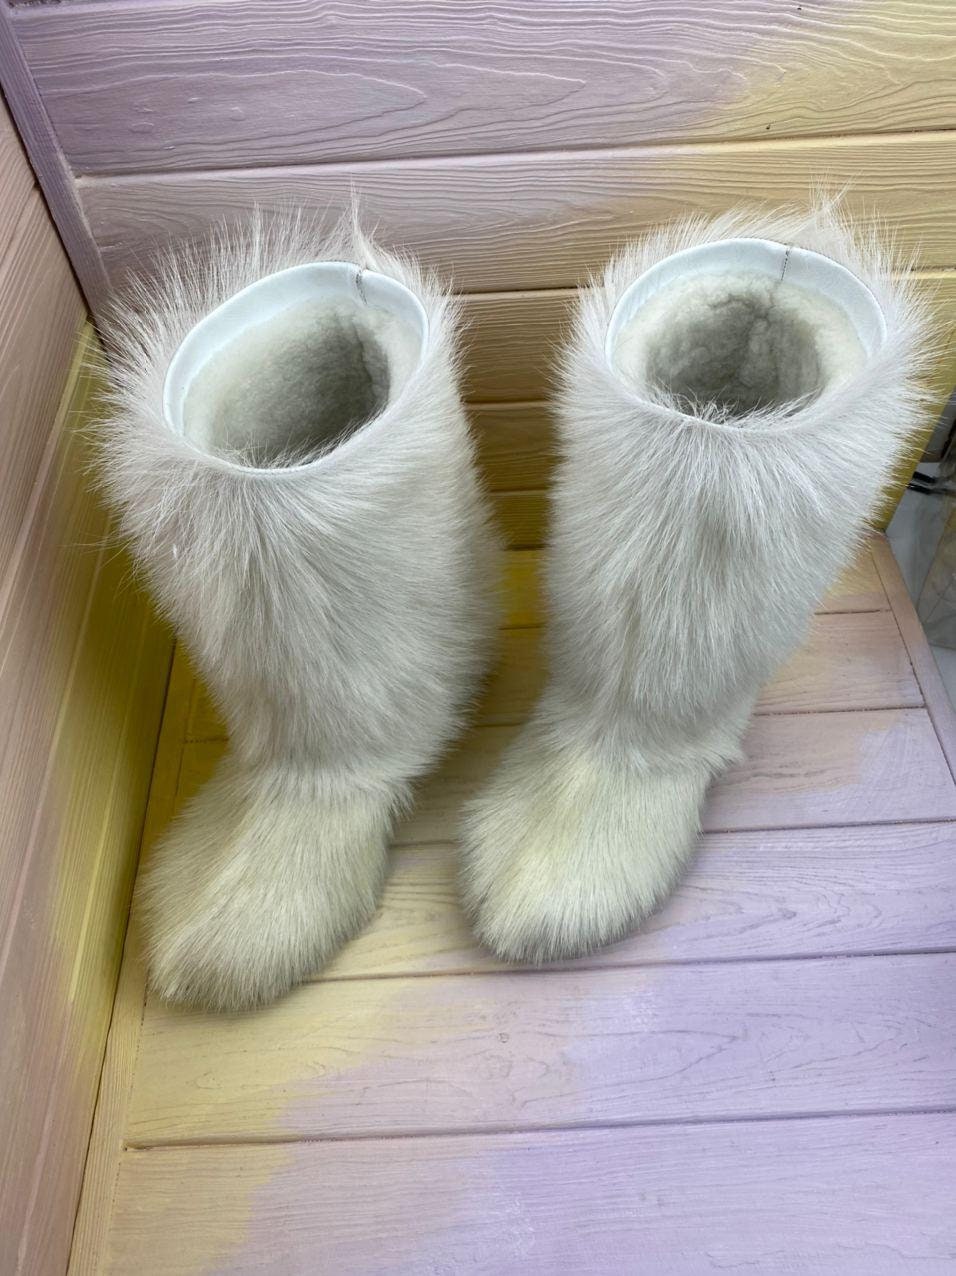 White fur boots for women long fur boots yeti boots white | Etsy